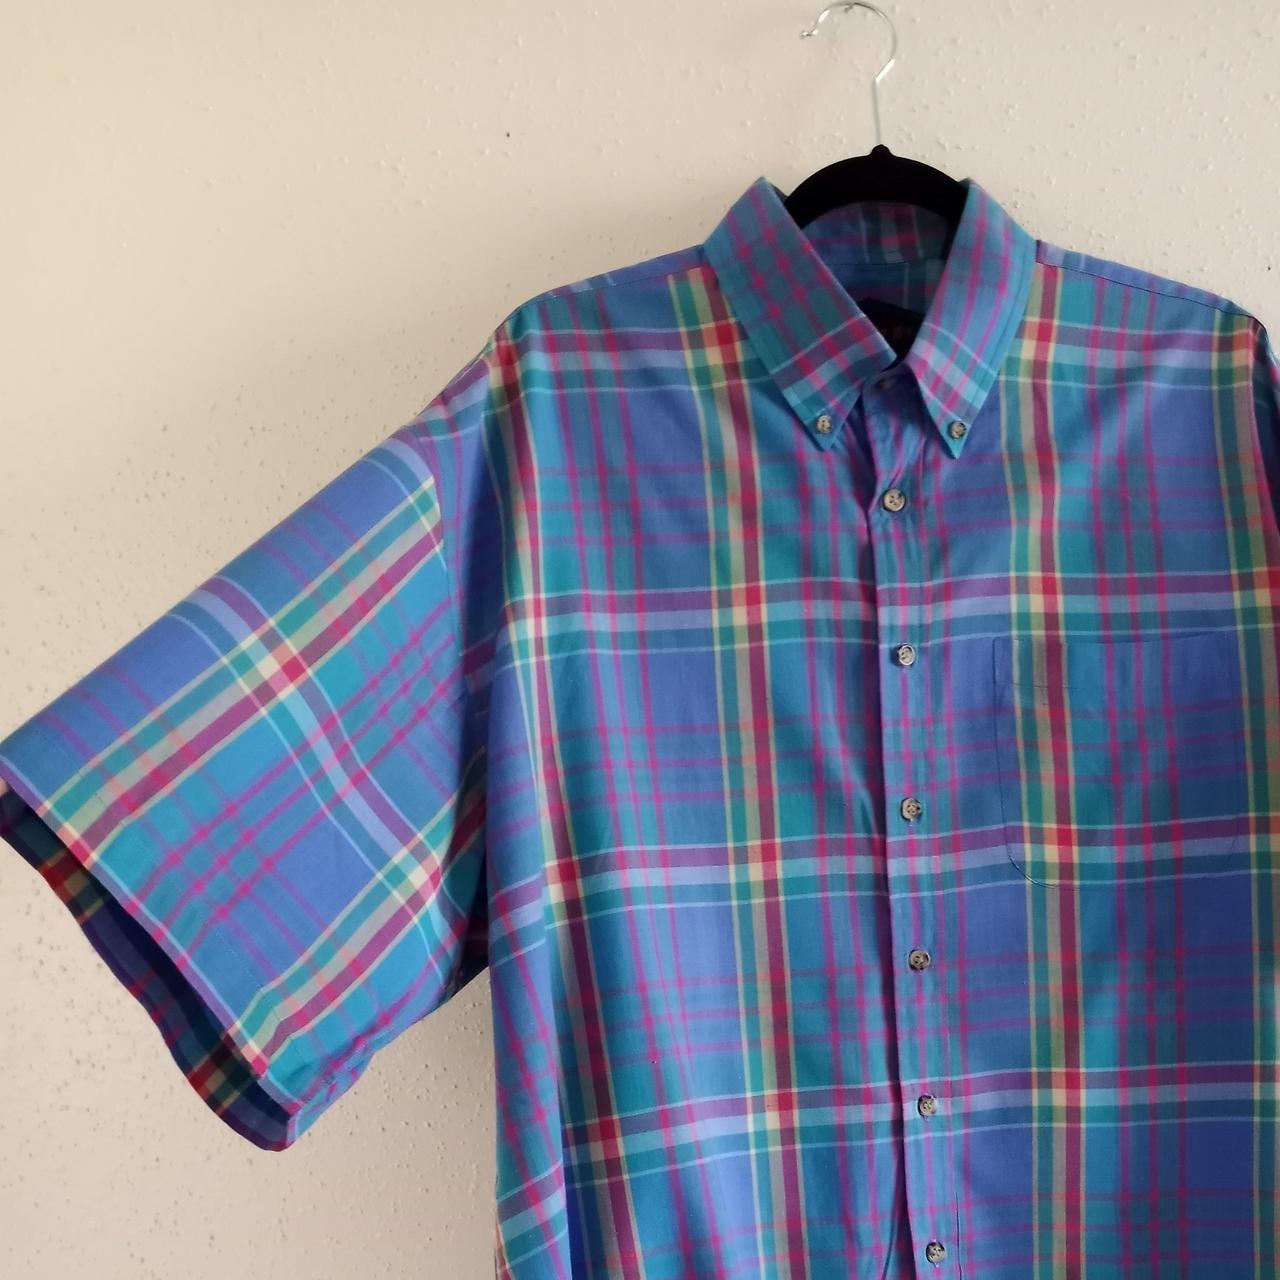 Product Image 4 - Halifax Outfitters Mens Shirt
Excellent condition